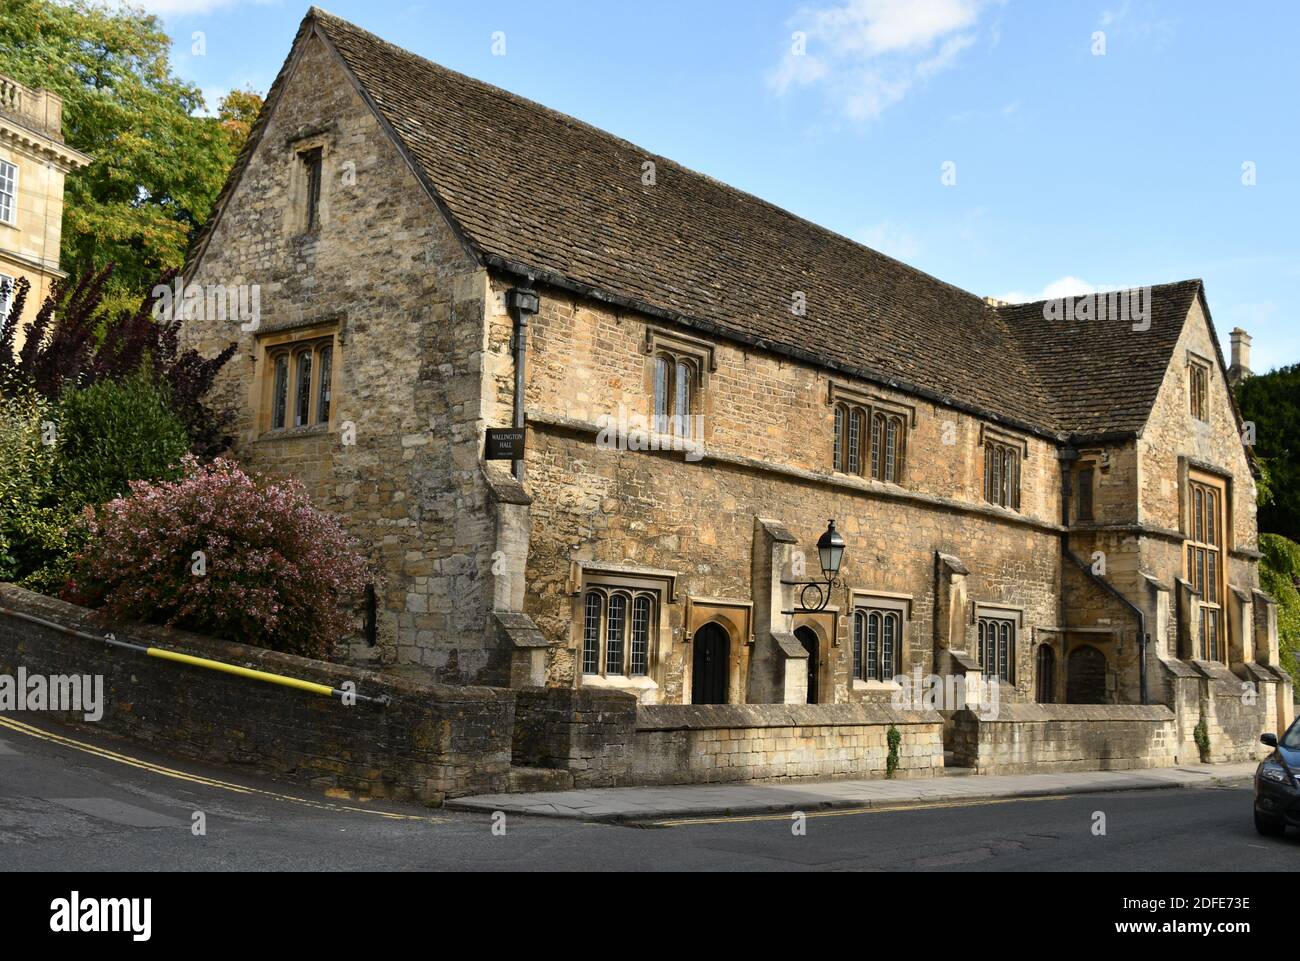 The Wallington hall was built in the early 1500's using local stone by a wealthy clothier. It has been used over the years as a church hall, boys scho Stock Photo